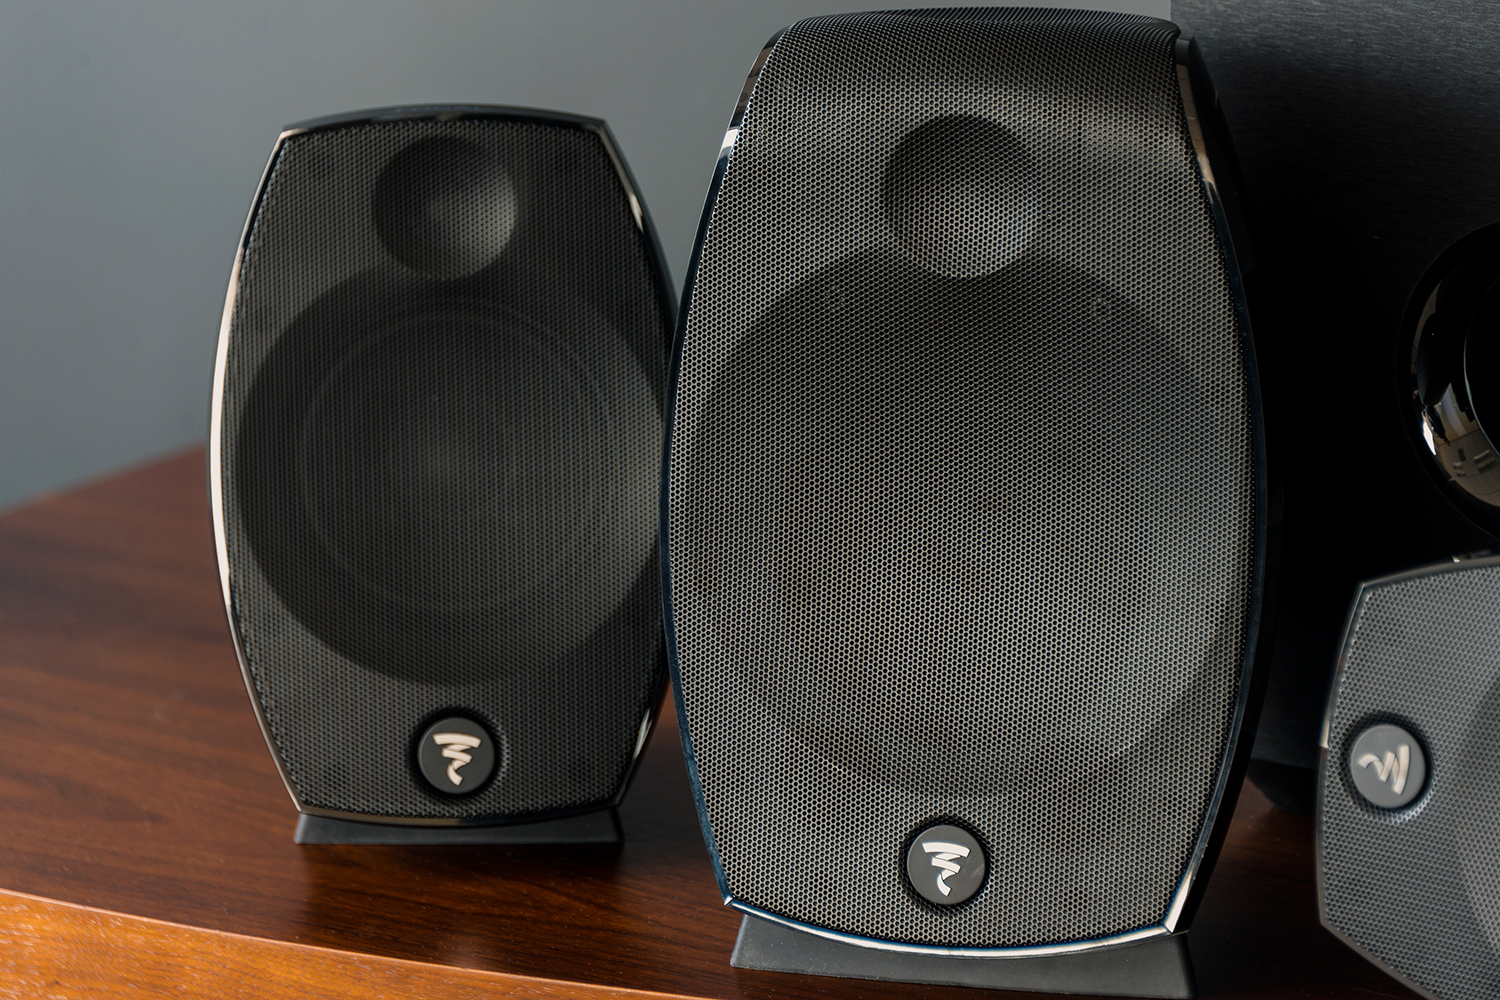 Focal Sib 2.0 specifications